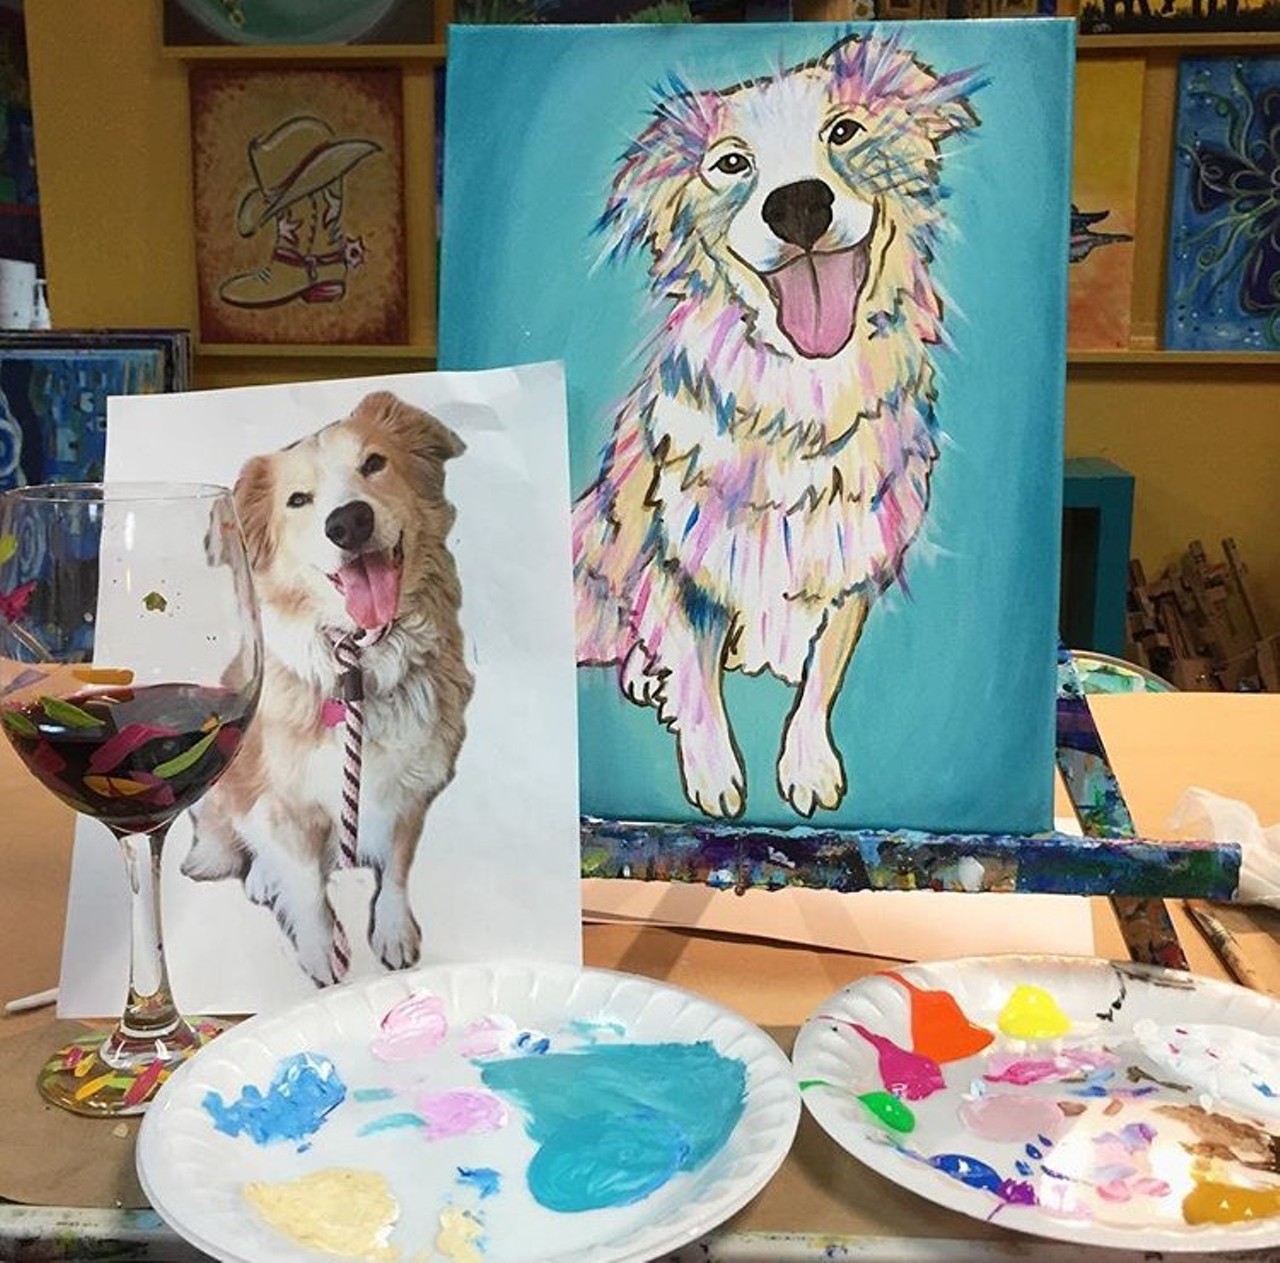 Whimsy Art Studio
2211 NW Military Hwy Ste. 116, (210) 460-6610, 
Creativity is sure to drip from your family’s masterpieces as they beat the Texas heat with Whimsy Art Studio’s super fun painting classes. While the studio is 100% family friendly, adults can enjoy alcoholic beverages while they create beautiful art that will last a lifetime.
Photo via Instagram / maddygascar25